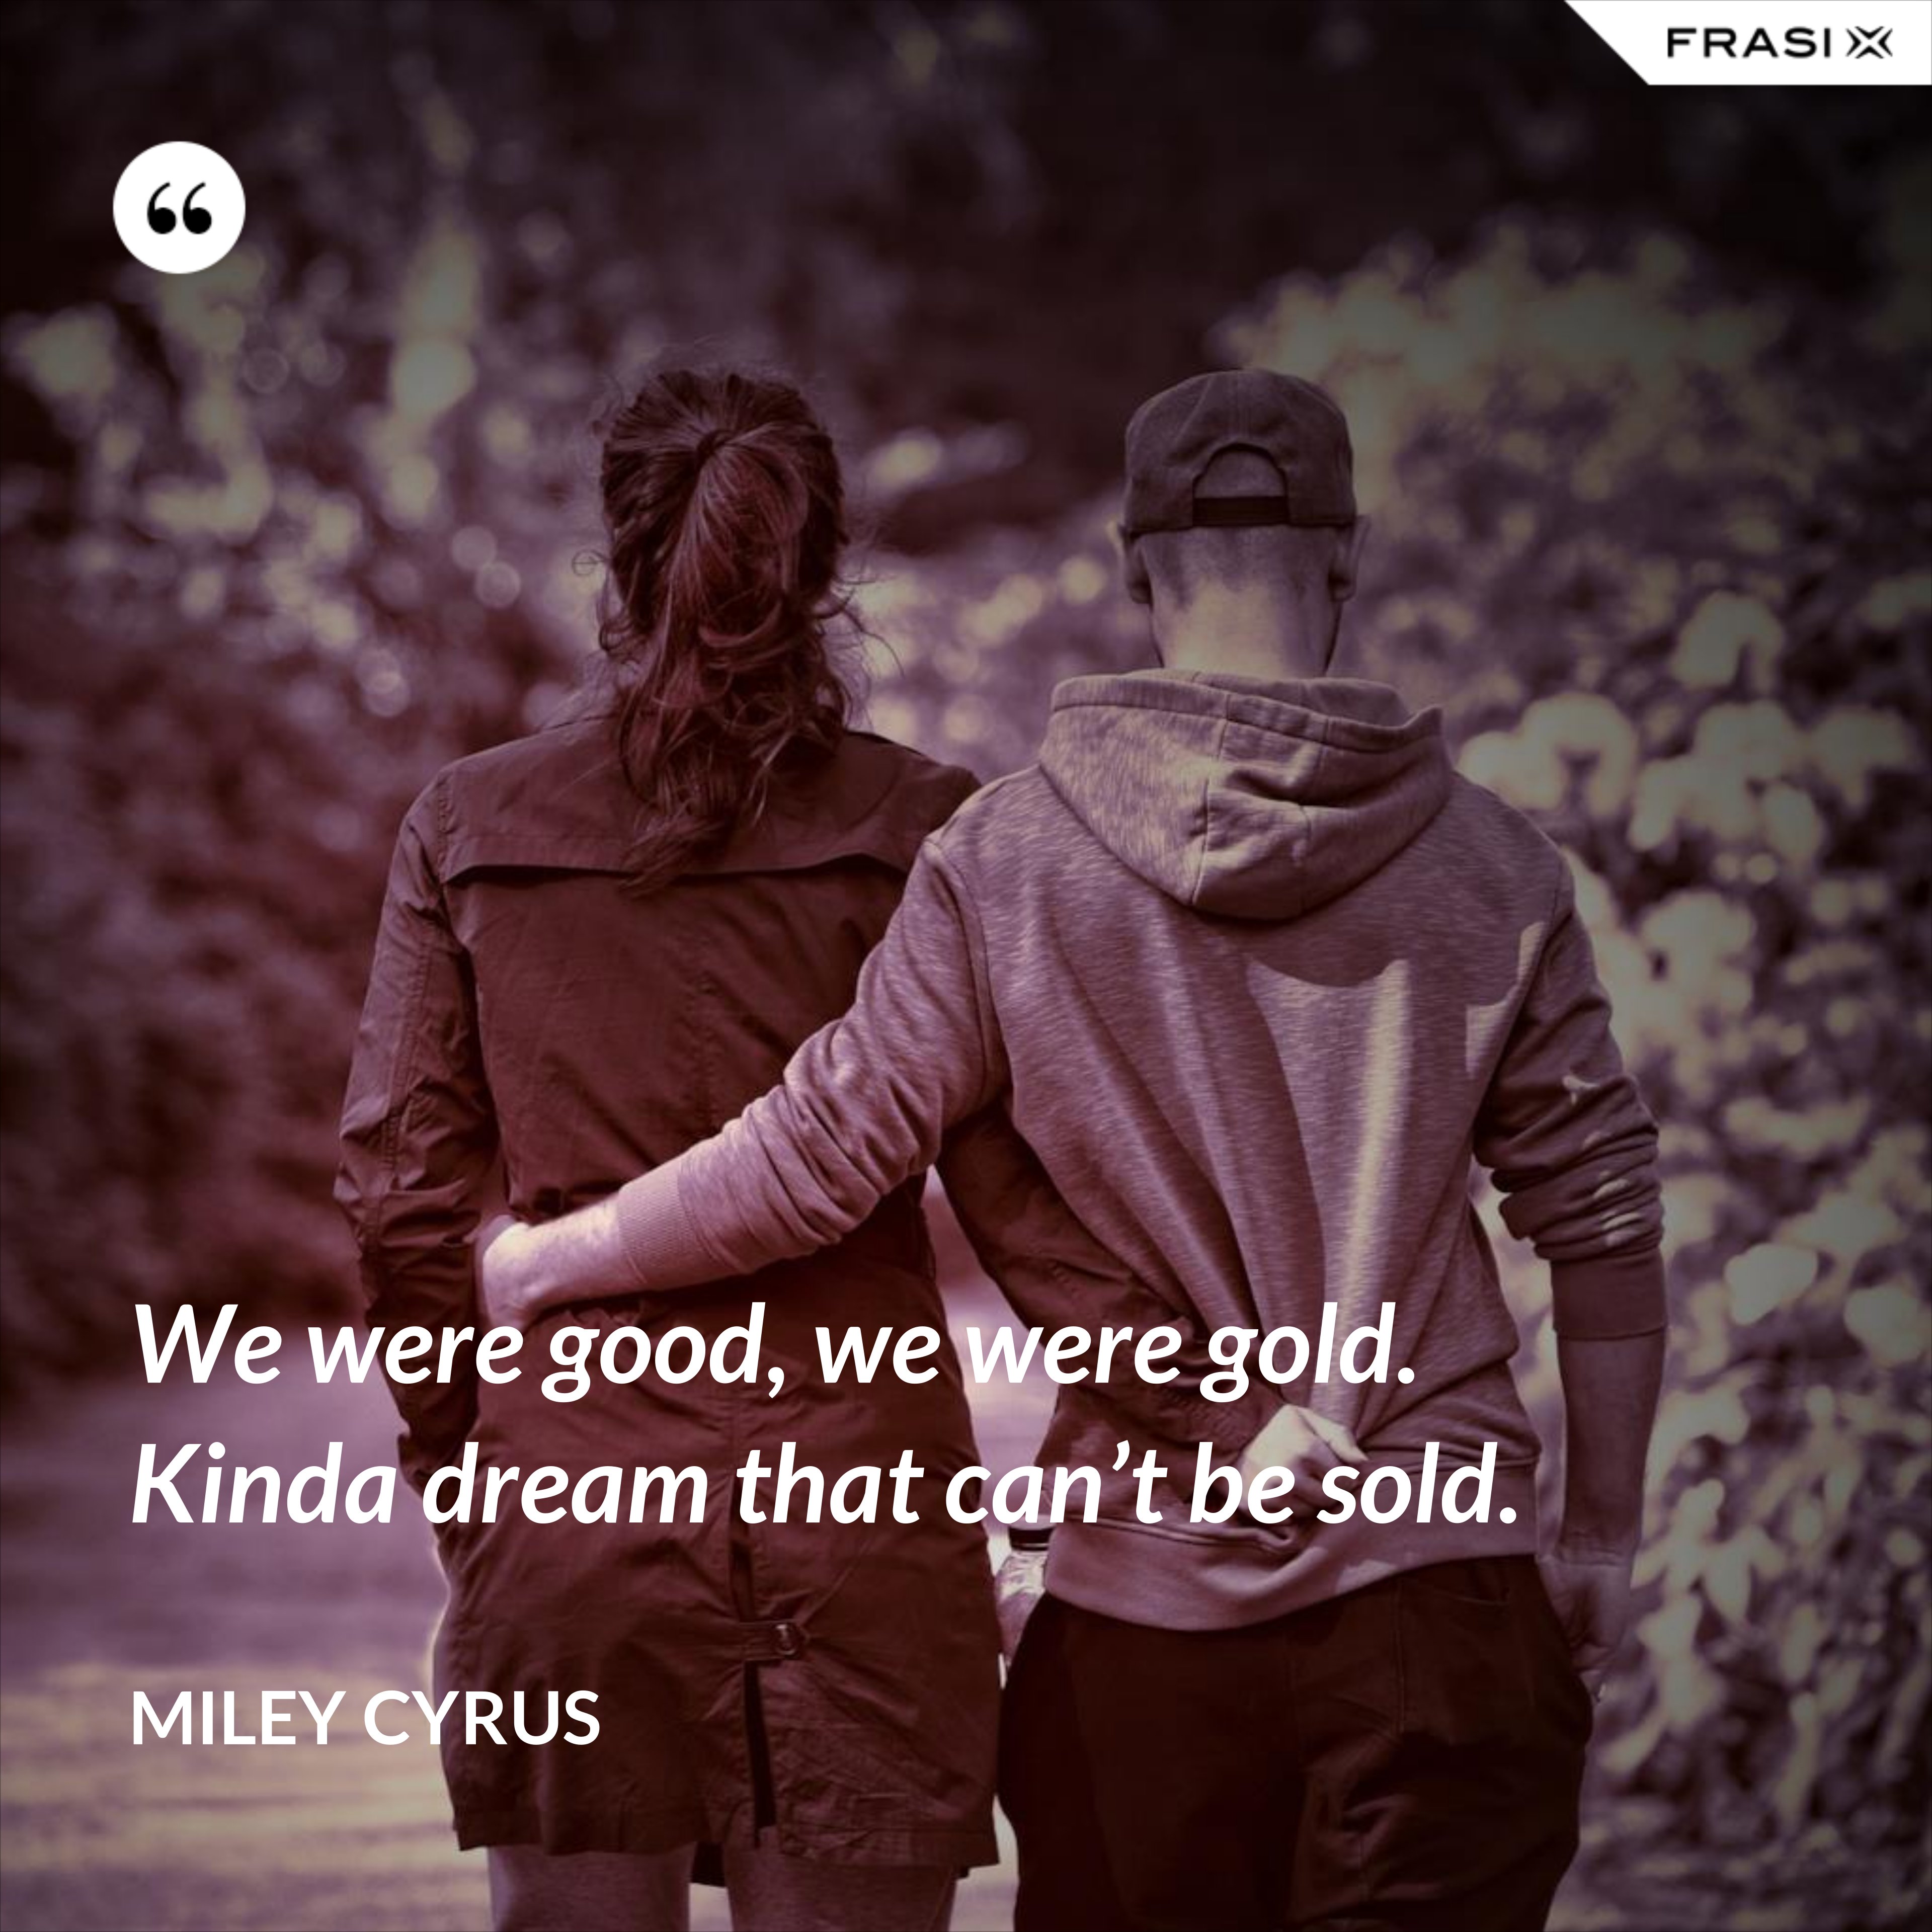 We were good, we were gold. Kinda dream that can’t be sold. - Miley Cyrus